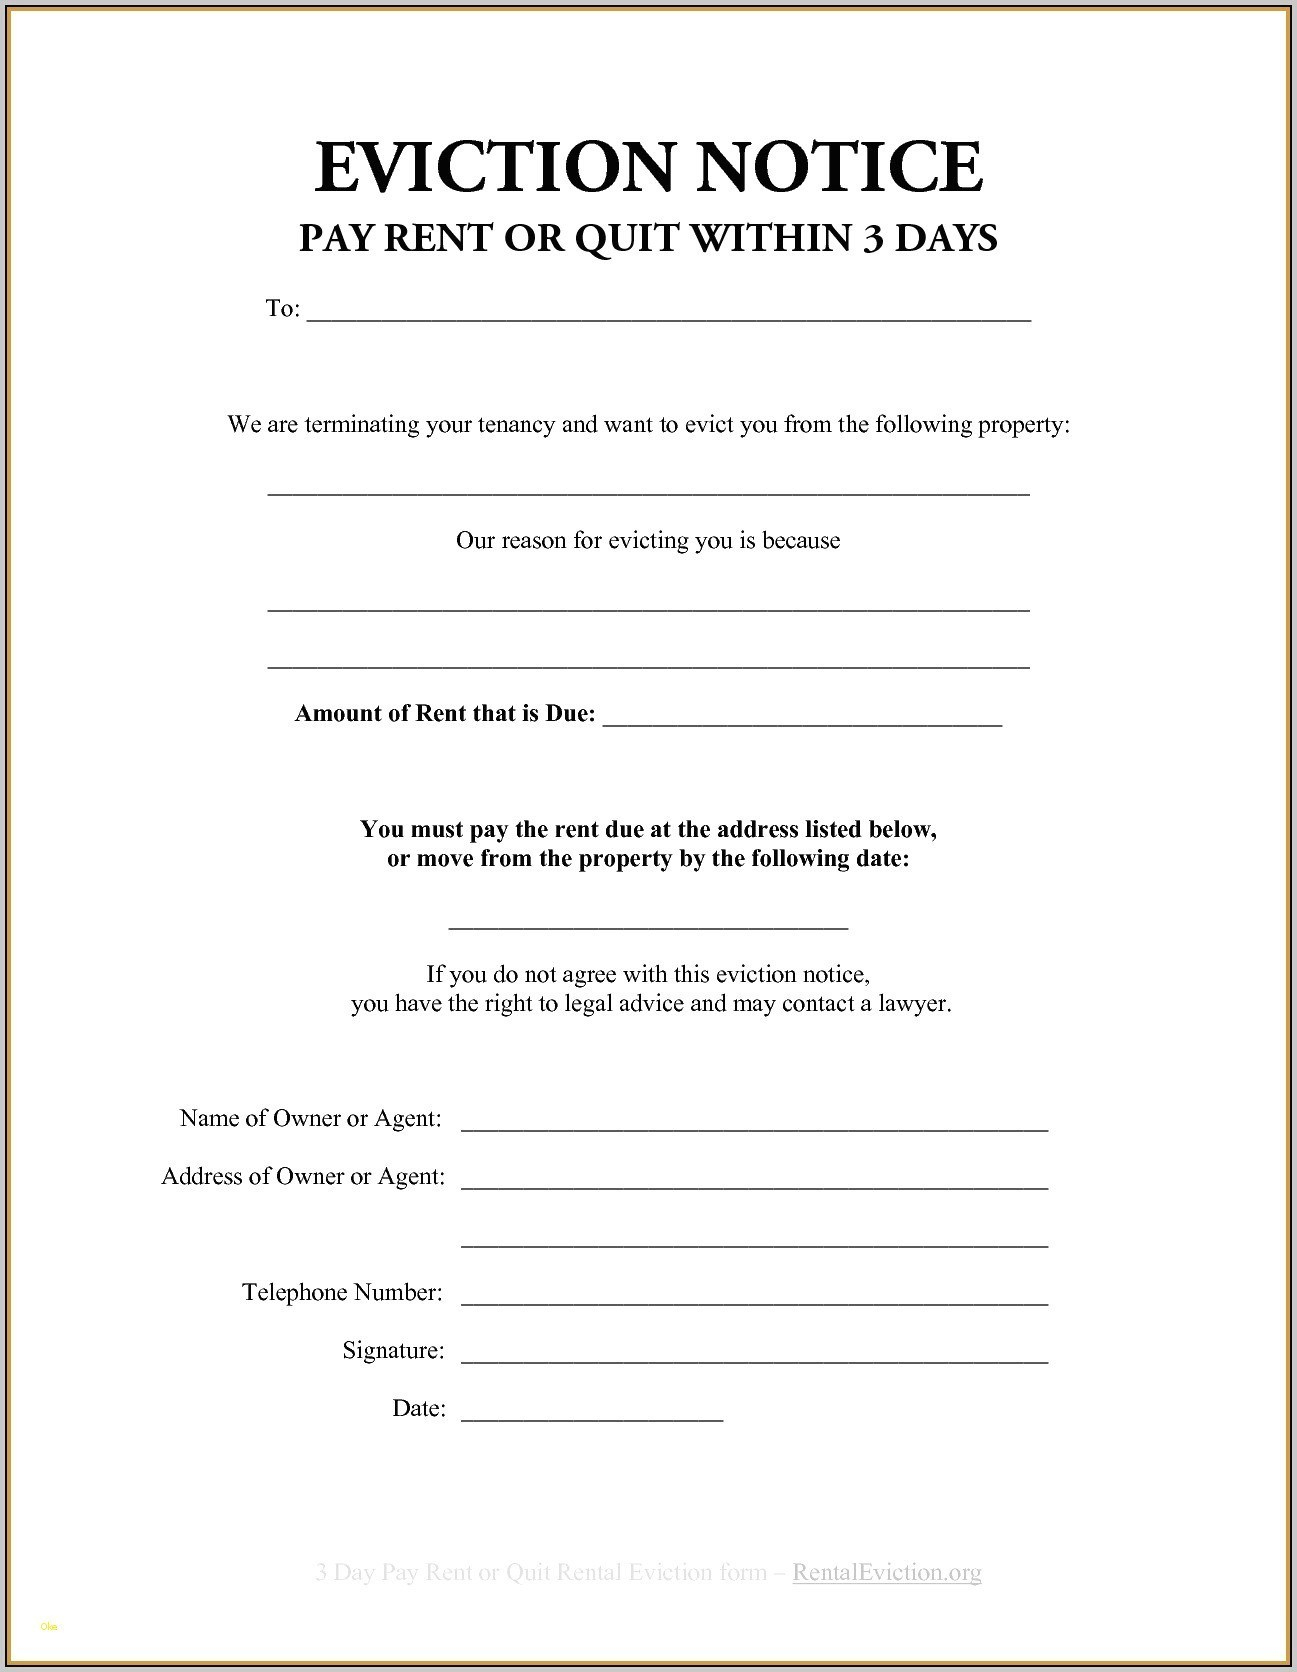 Sample Eviction Notice Letter Printable Form Template Free Notices - Free Printable Blank Eviction Notice